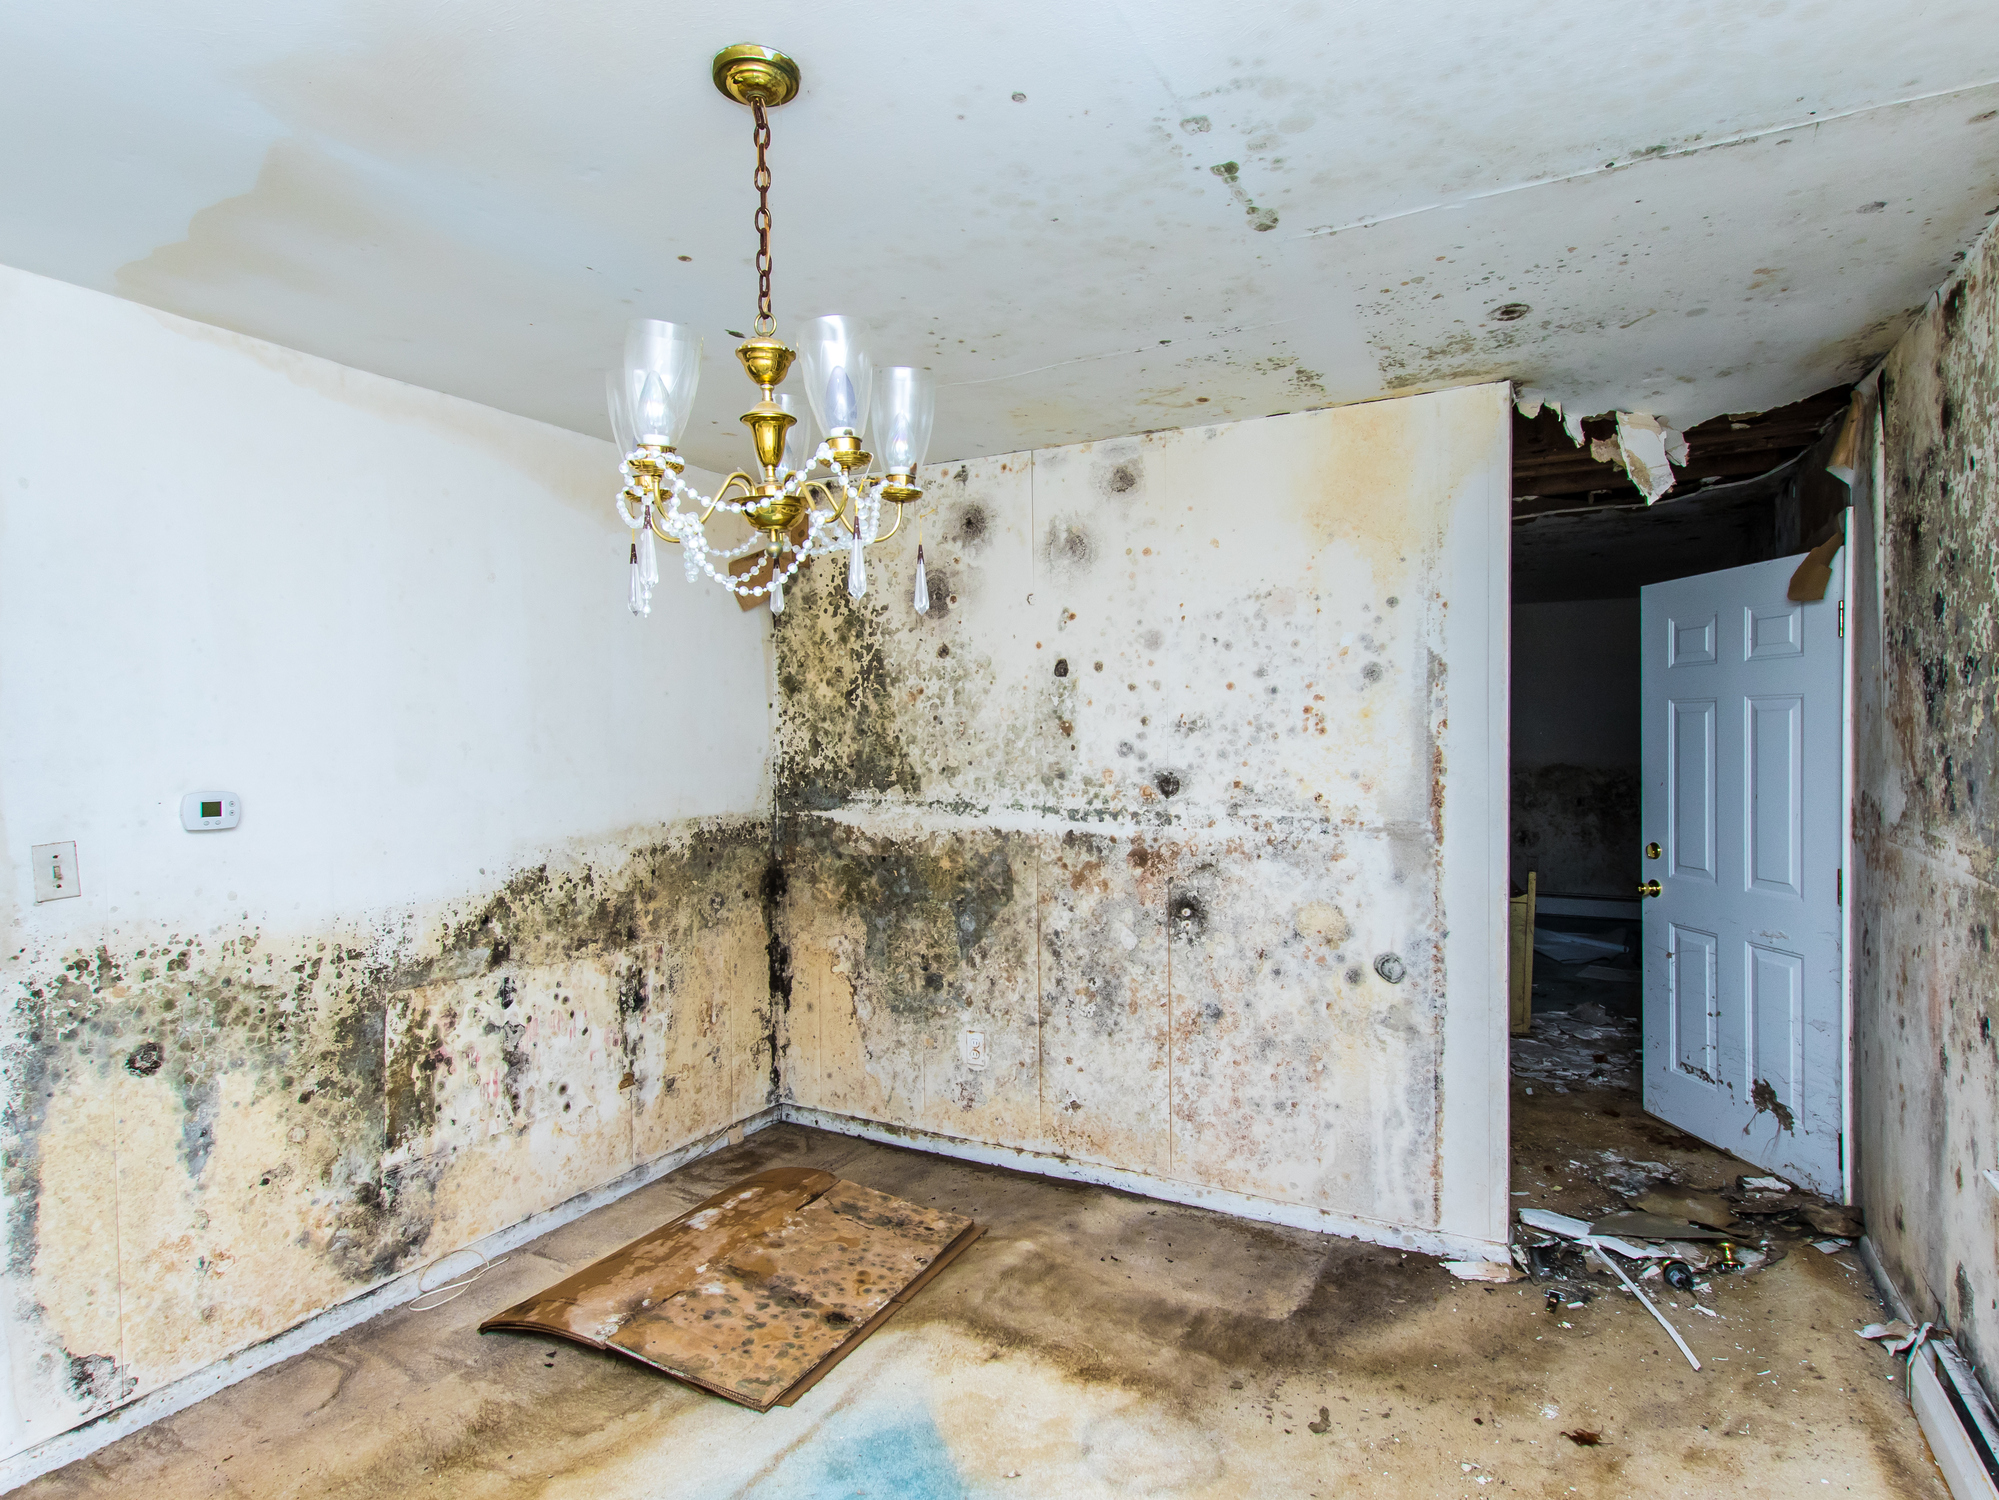 Can Food Mold Lead to Mold Growing in Your House?